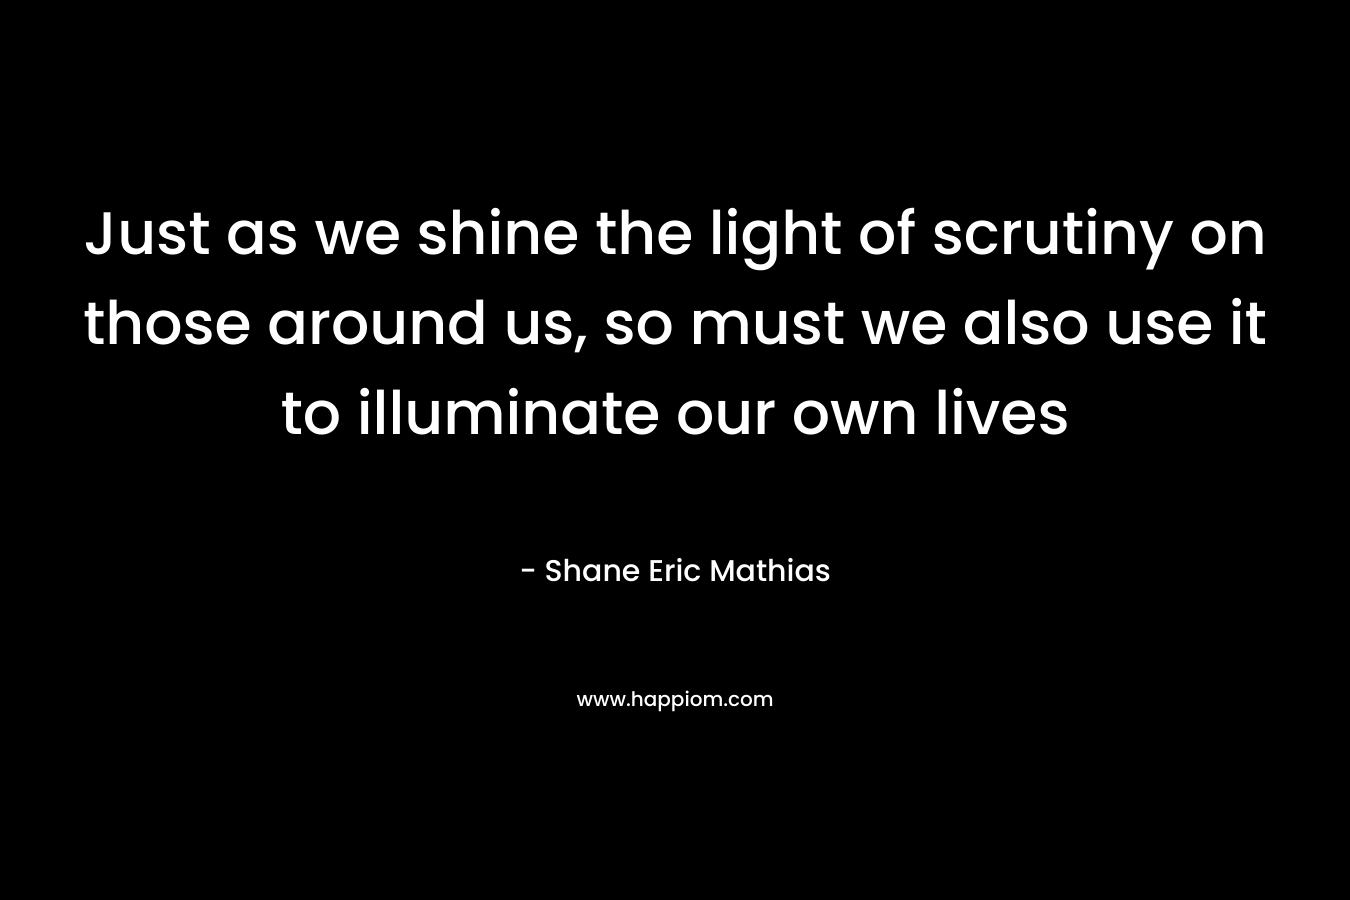 Just as we shine the light of scrutiny on those around us, so must we also use it to illuminate our own lives – Shane Eric Mathias